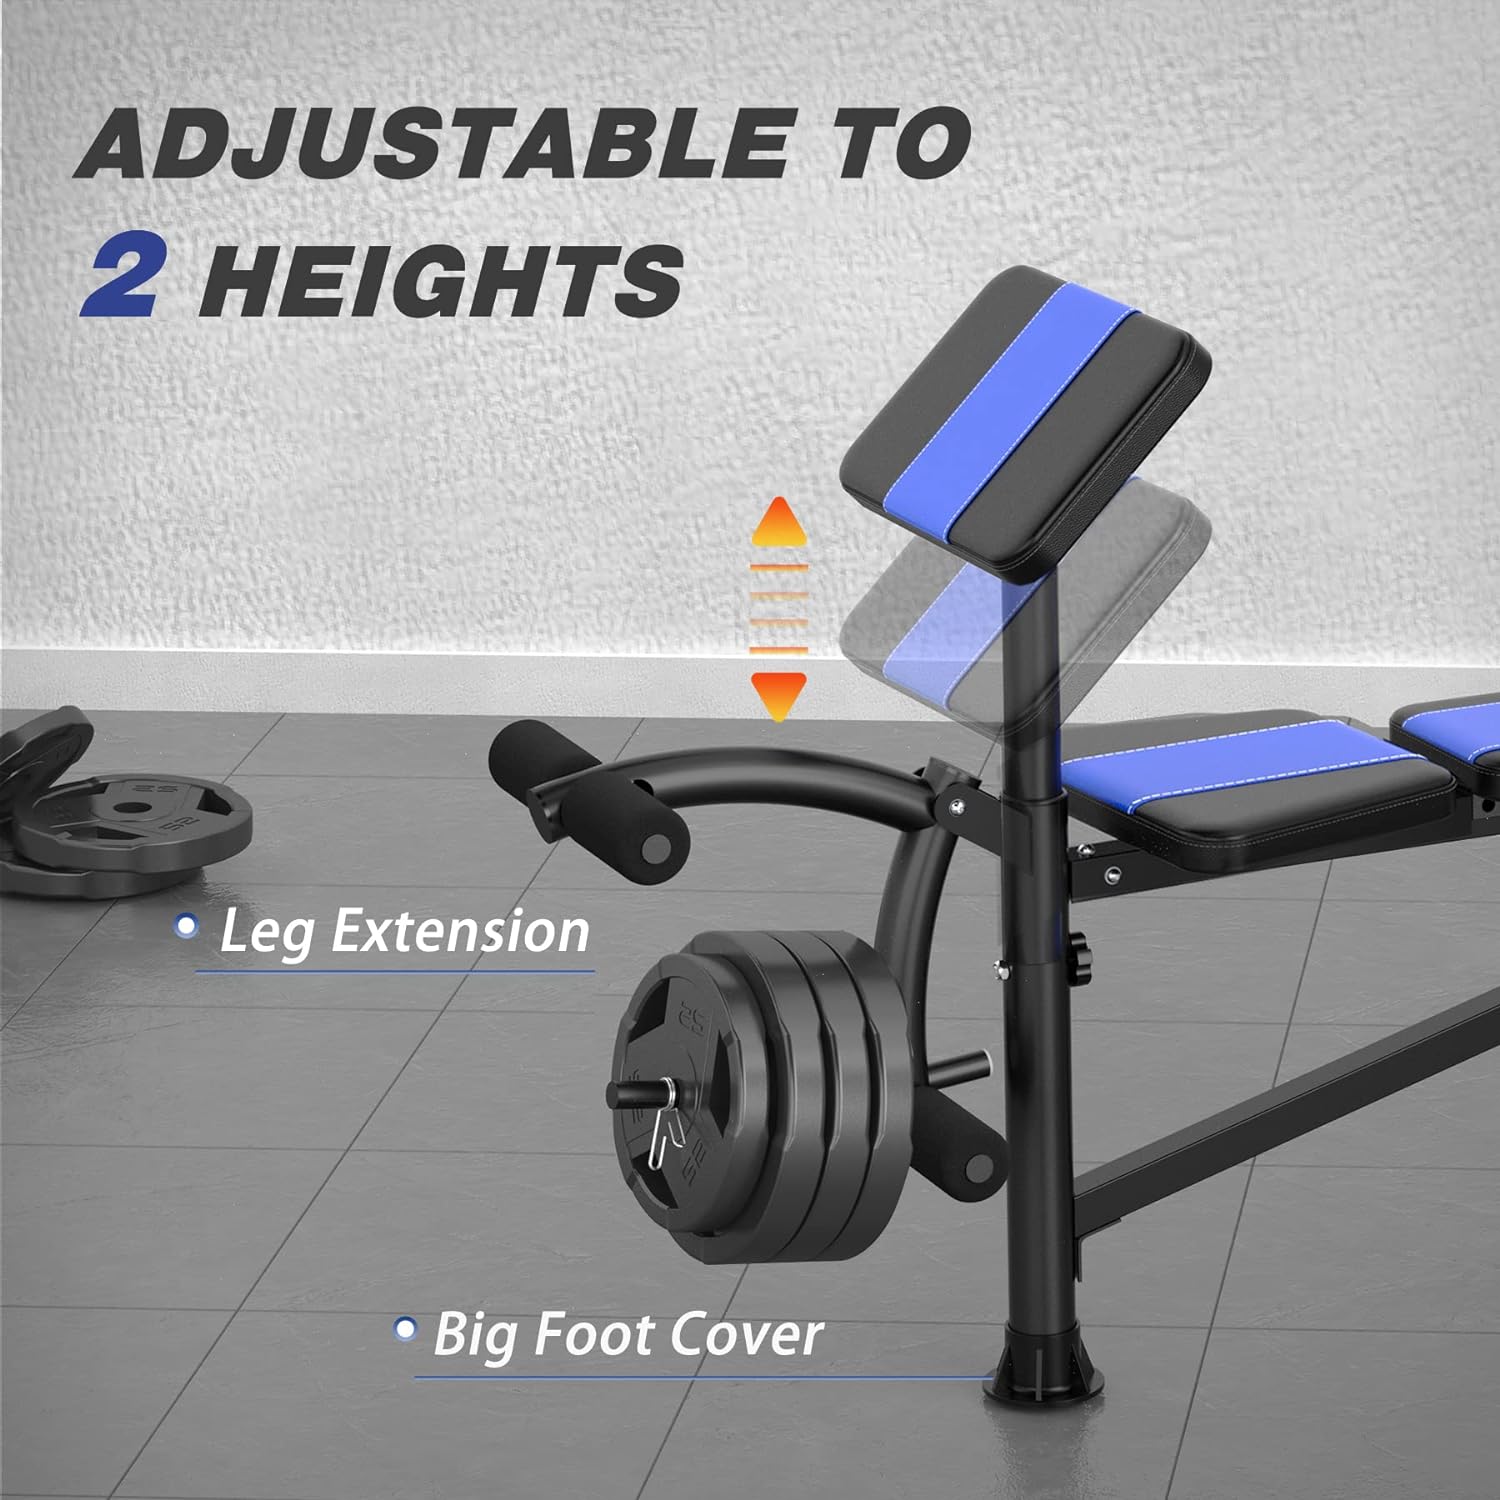 Adjustable Weight Bench, Olympic Workout Bench Press With Barbell Rack Leg Extension Preacher Curl for Strength Training